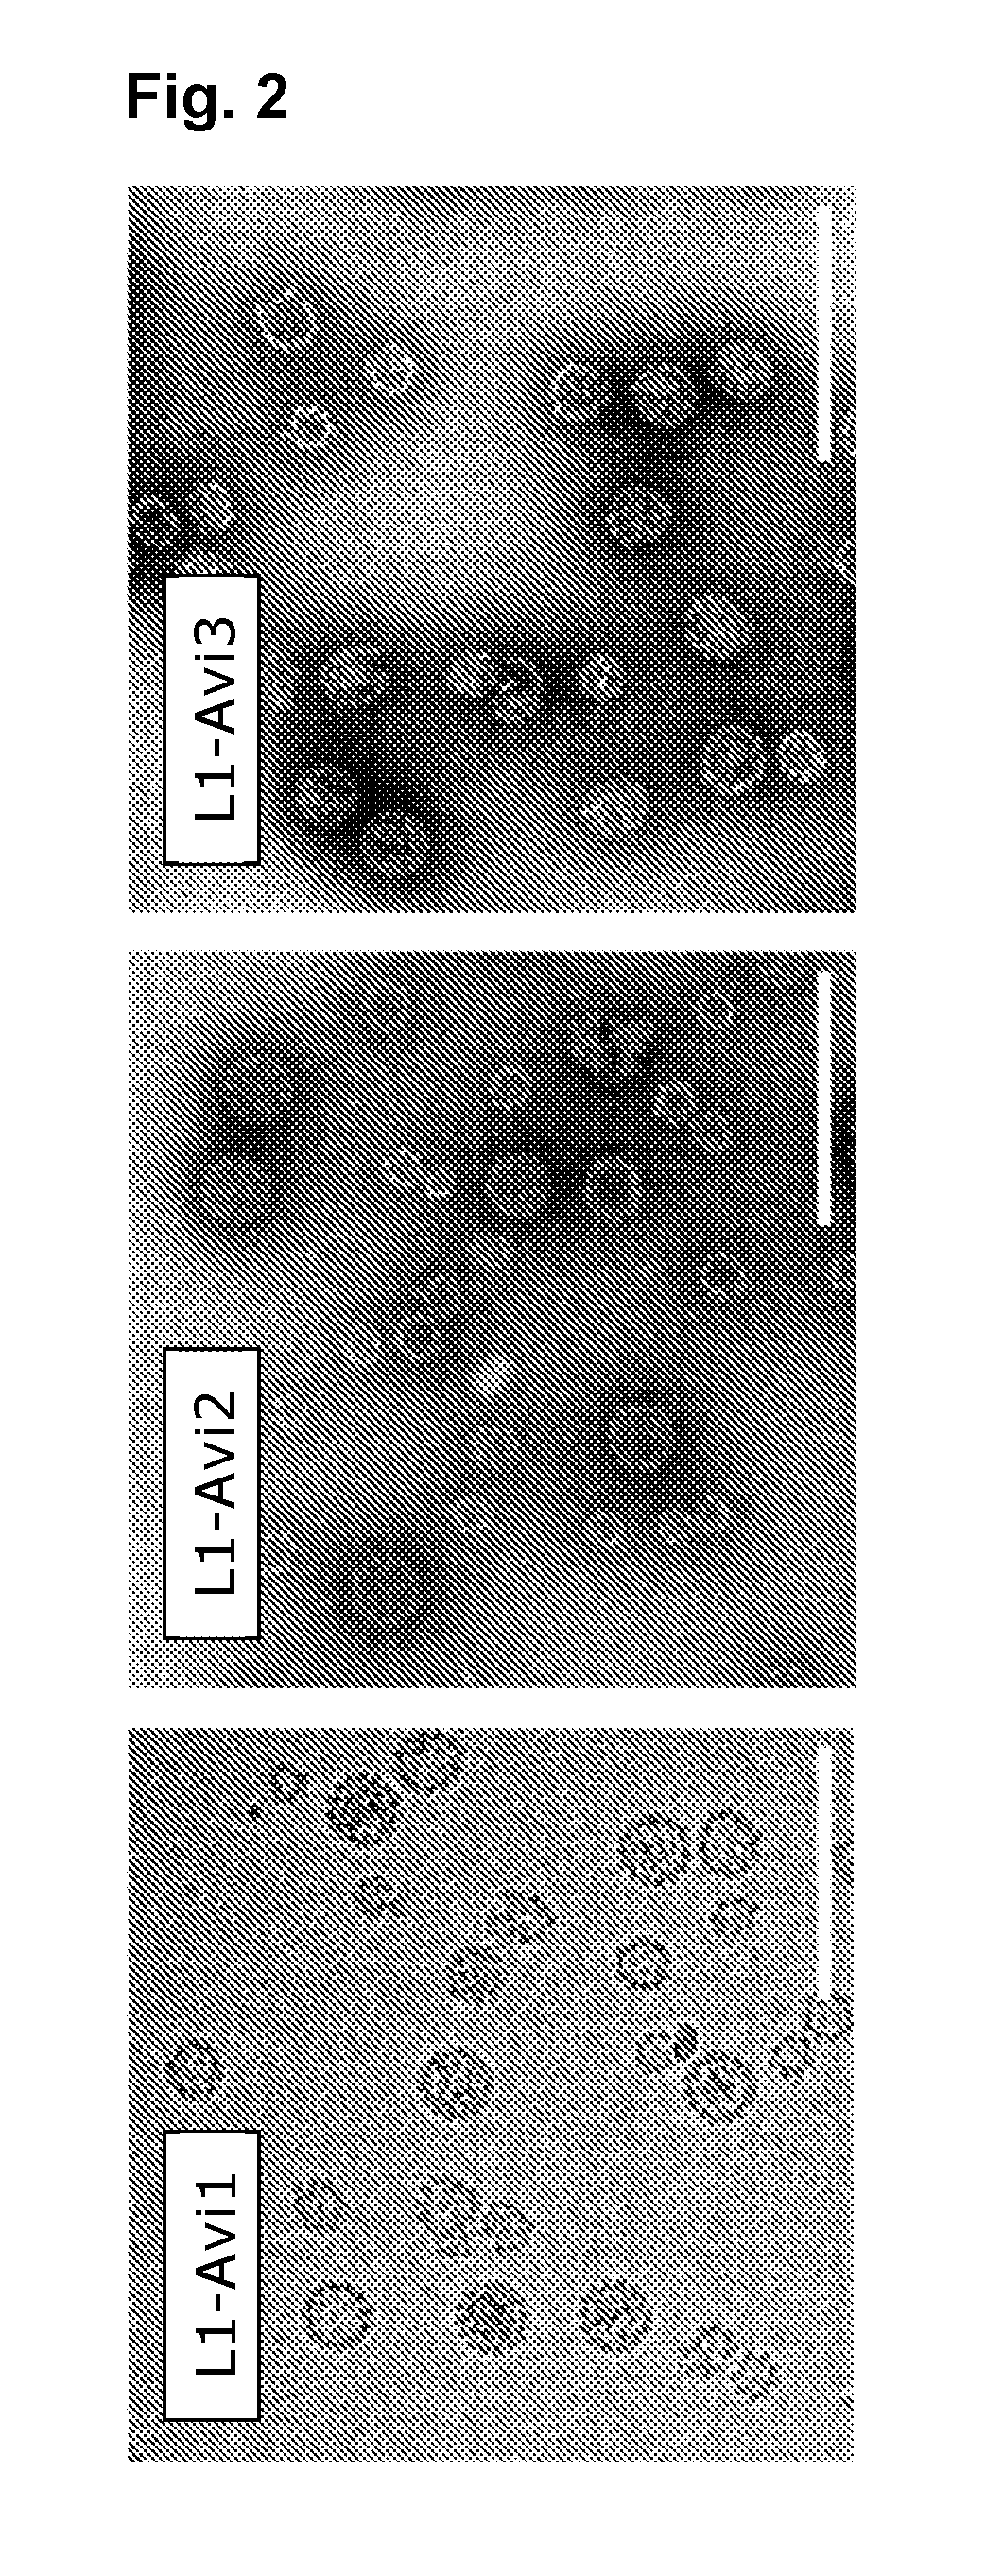 Virus like particle with efficient epitope display